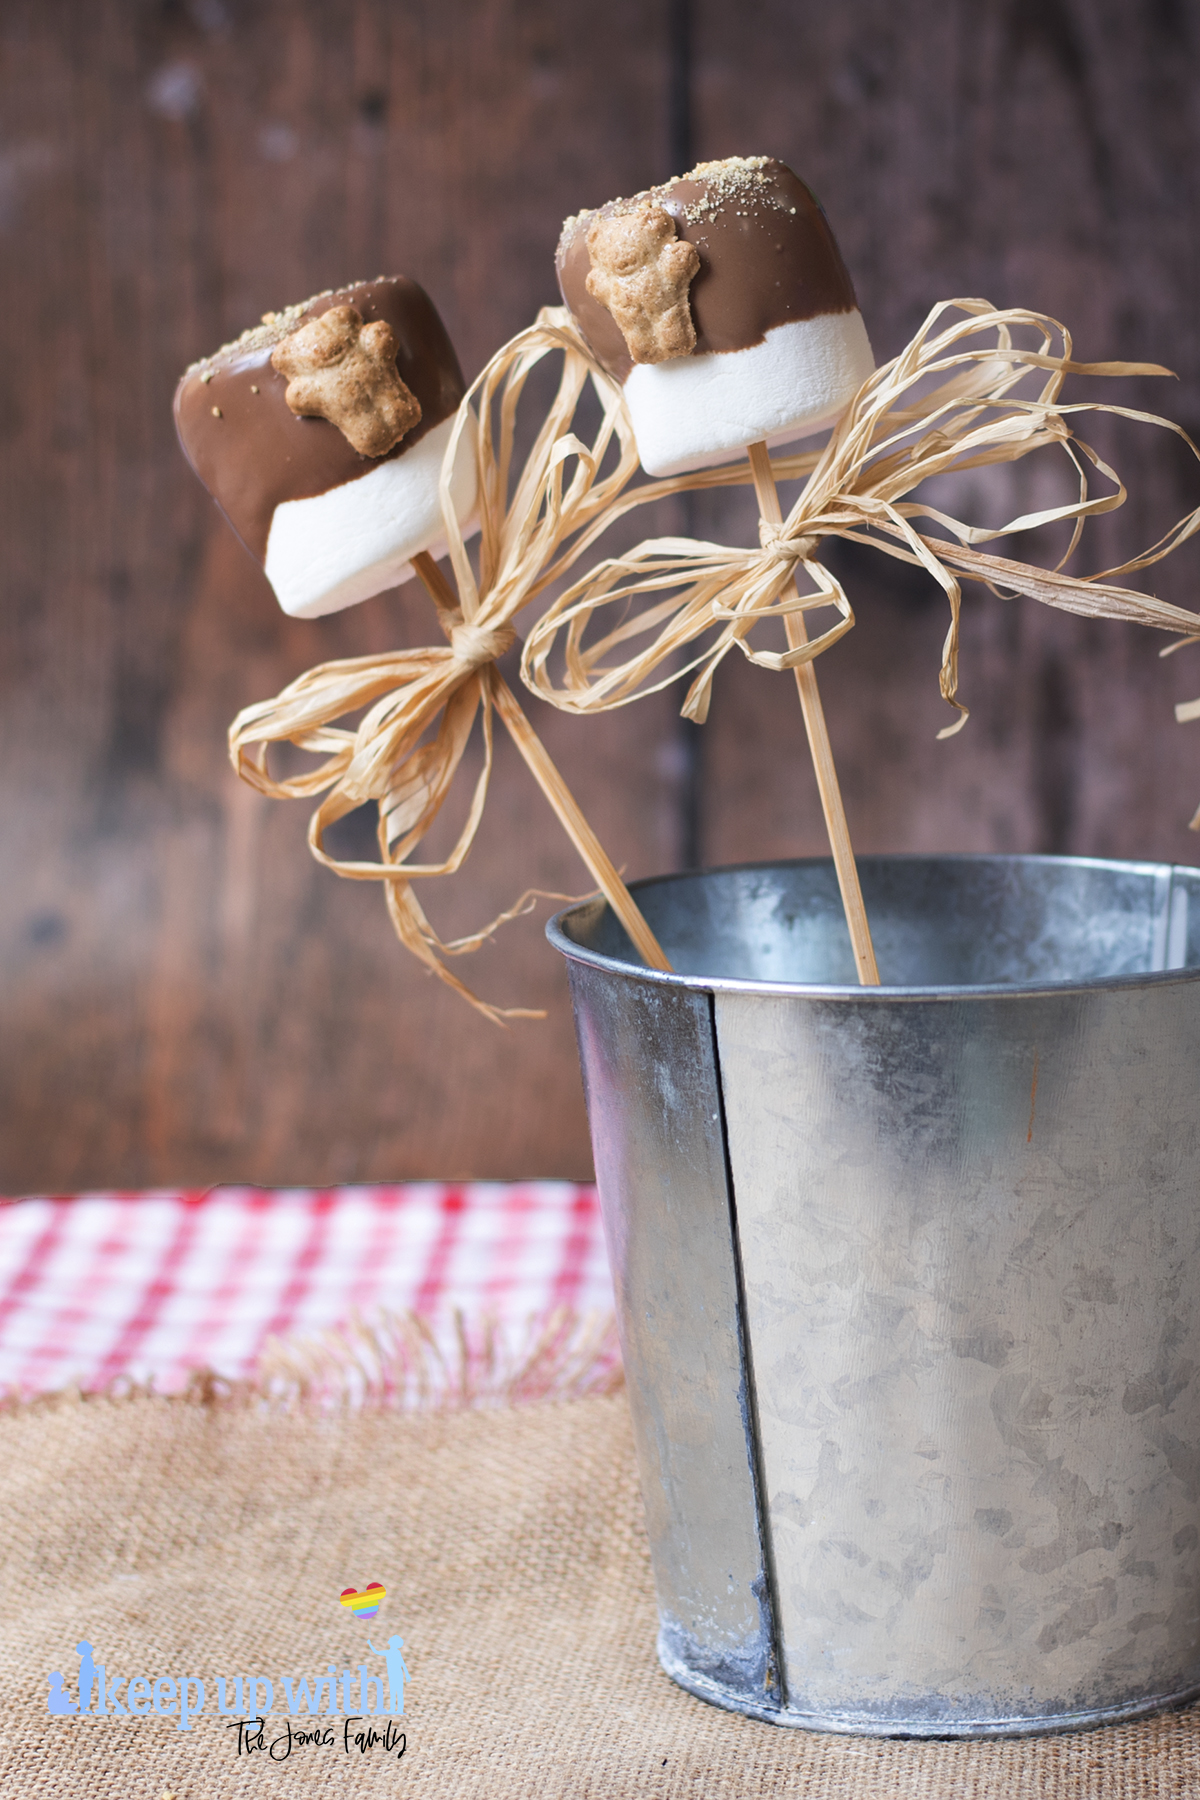 Image shows two teddy bear s'more pops with raffia ribbons in a tin bucket on a dark wooden tabletop. Image by keep up with the jones family.